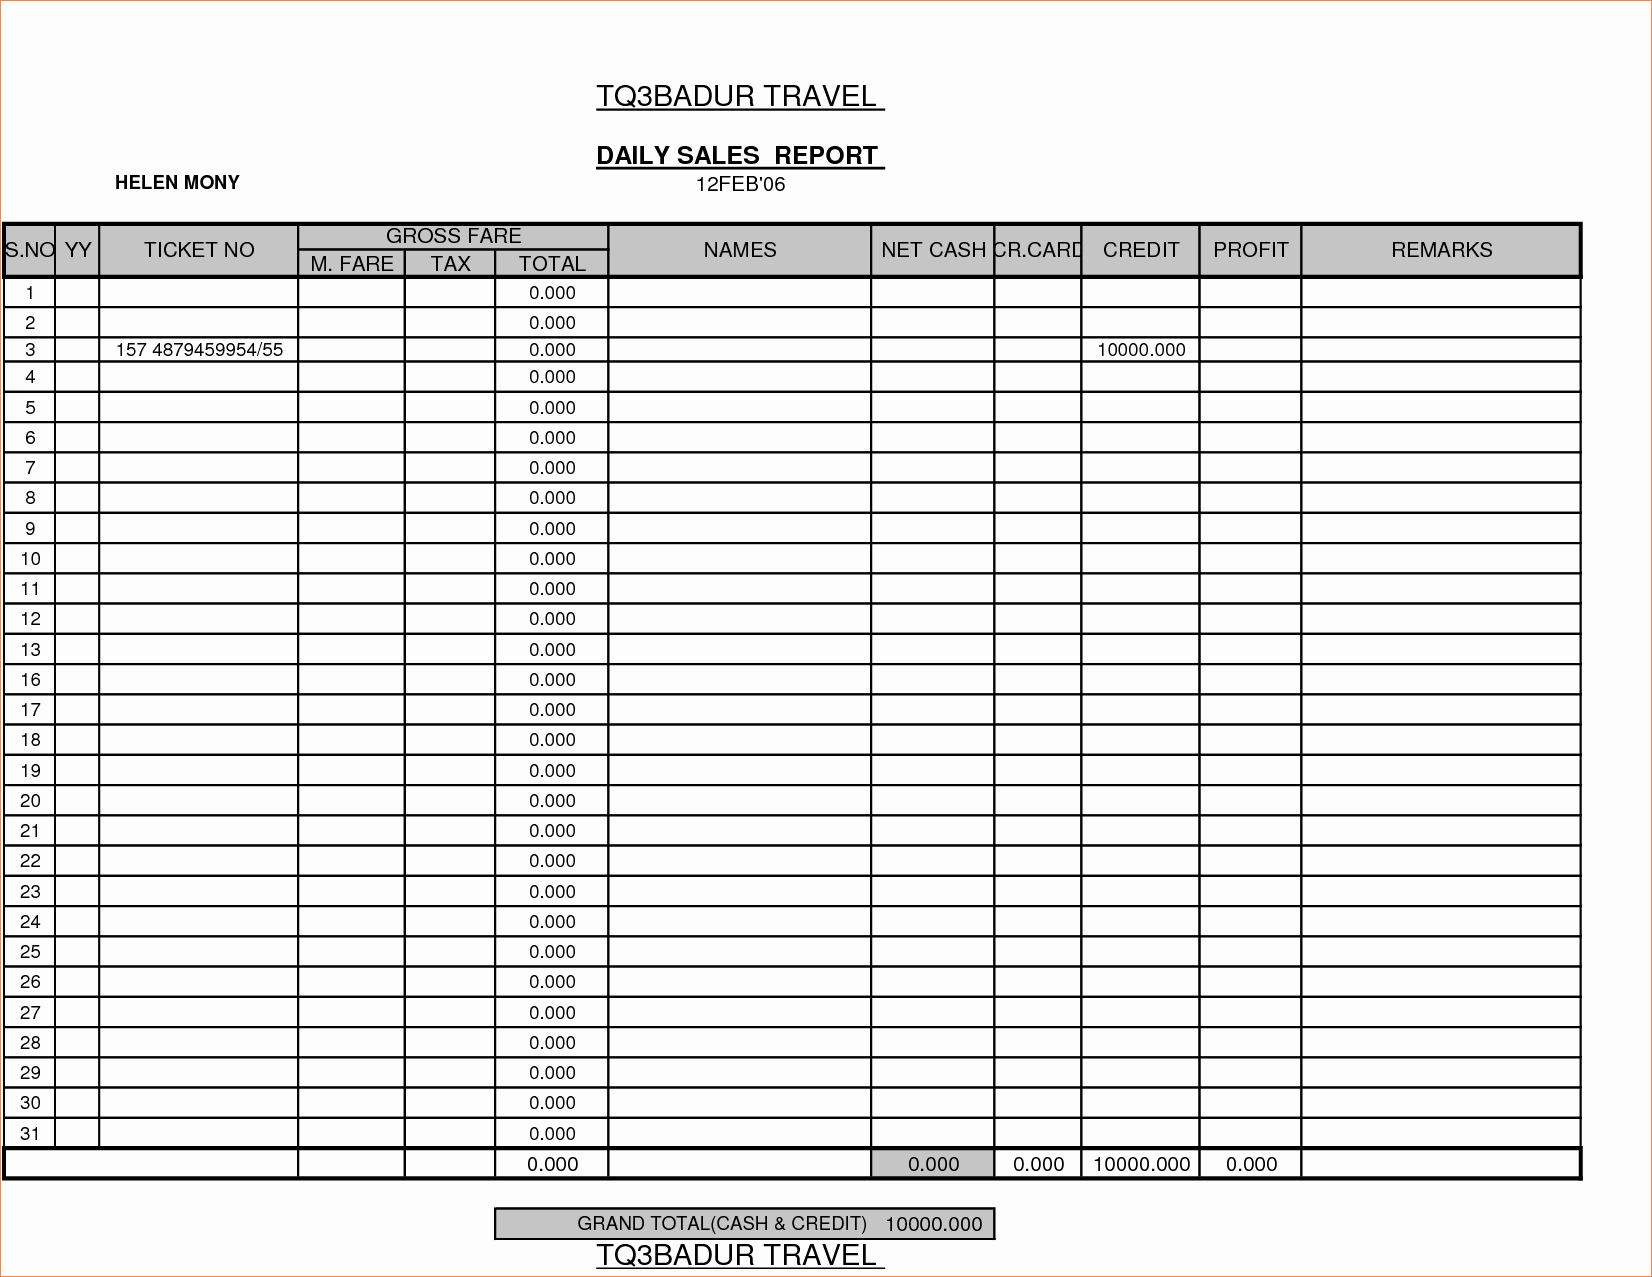 Daily Sales Report Template Fresh 8 Daily Sales Report Templatereport Template Document